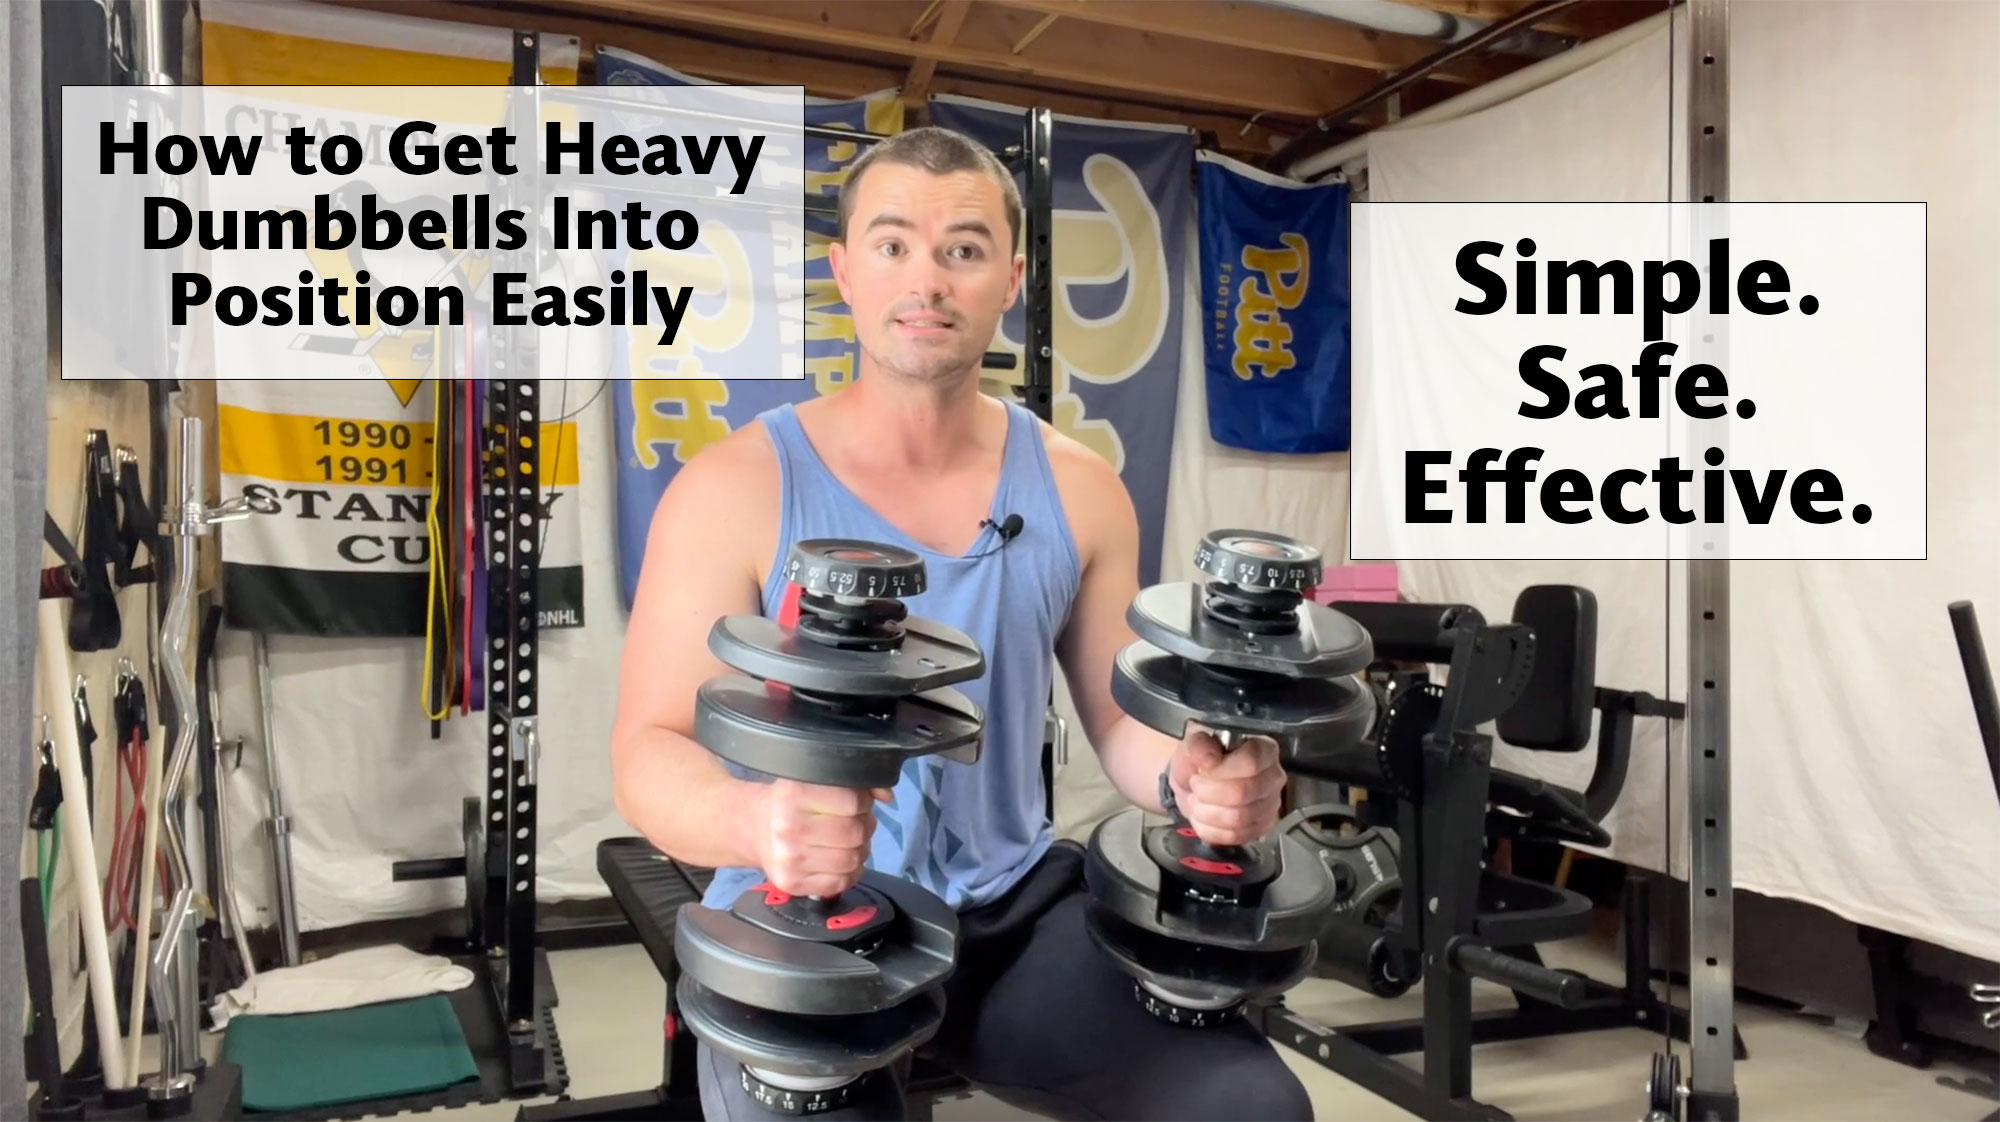 How to Get Heavy Dumbbells Into Position Easily